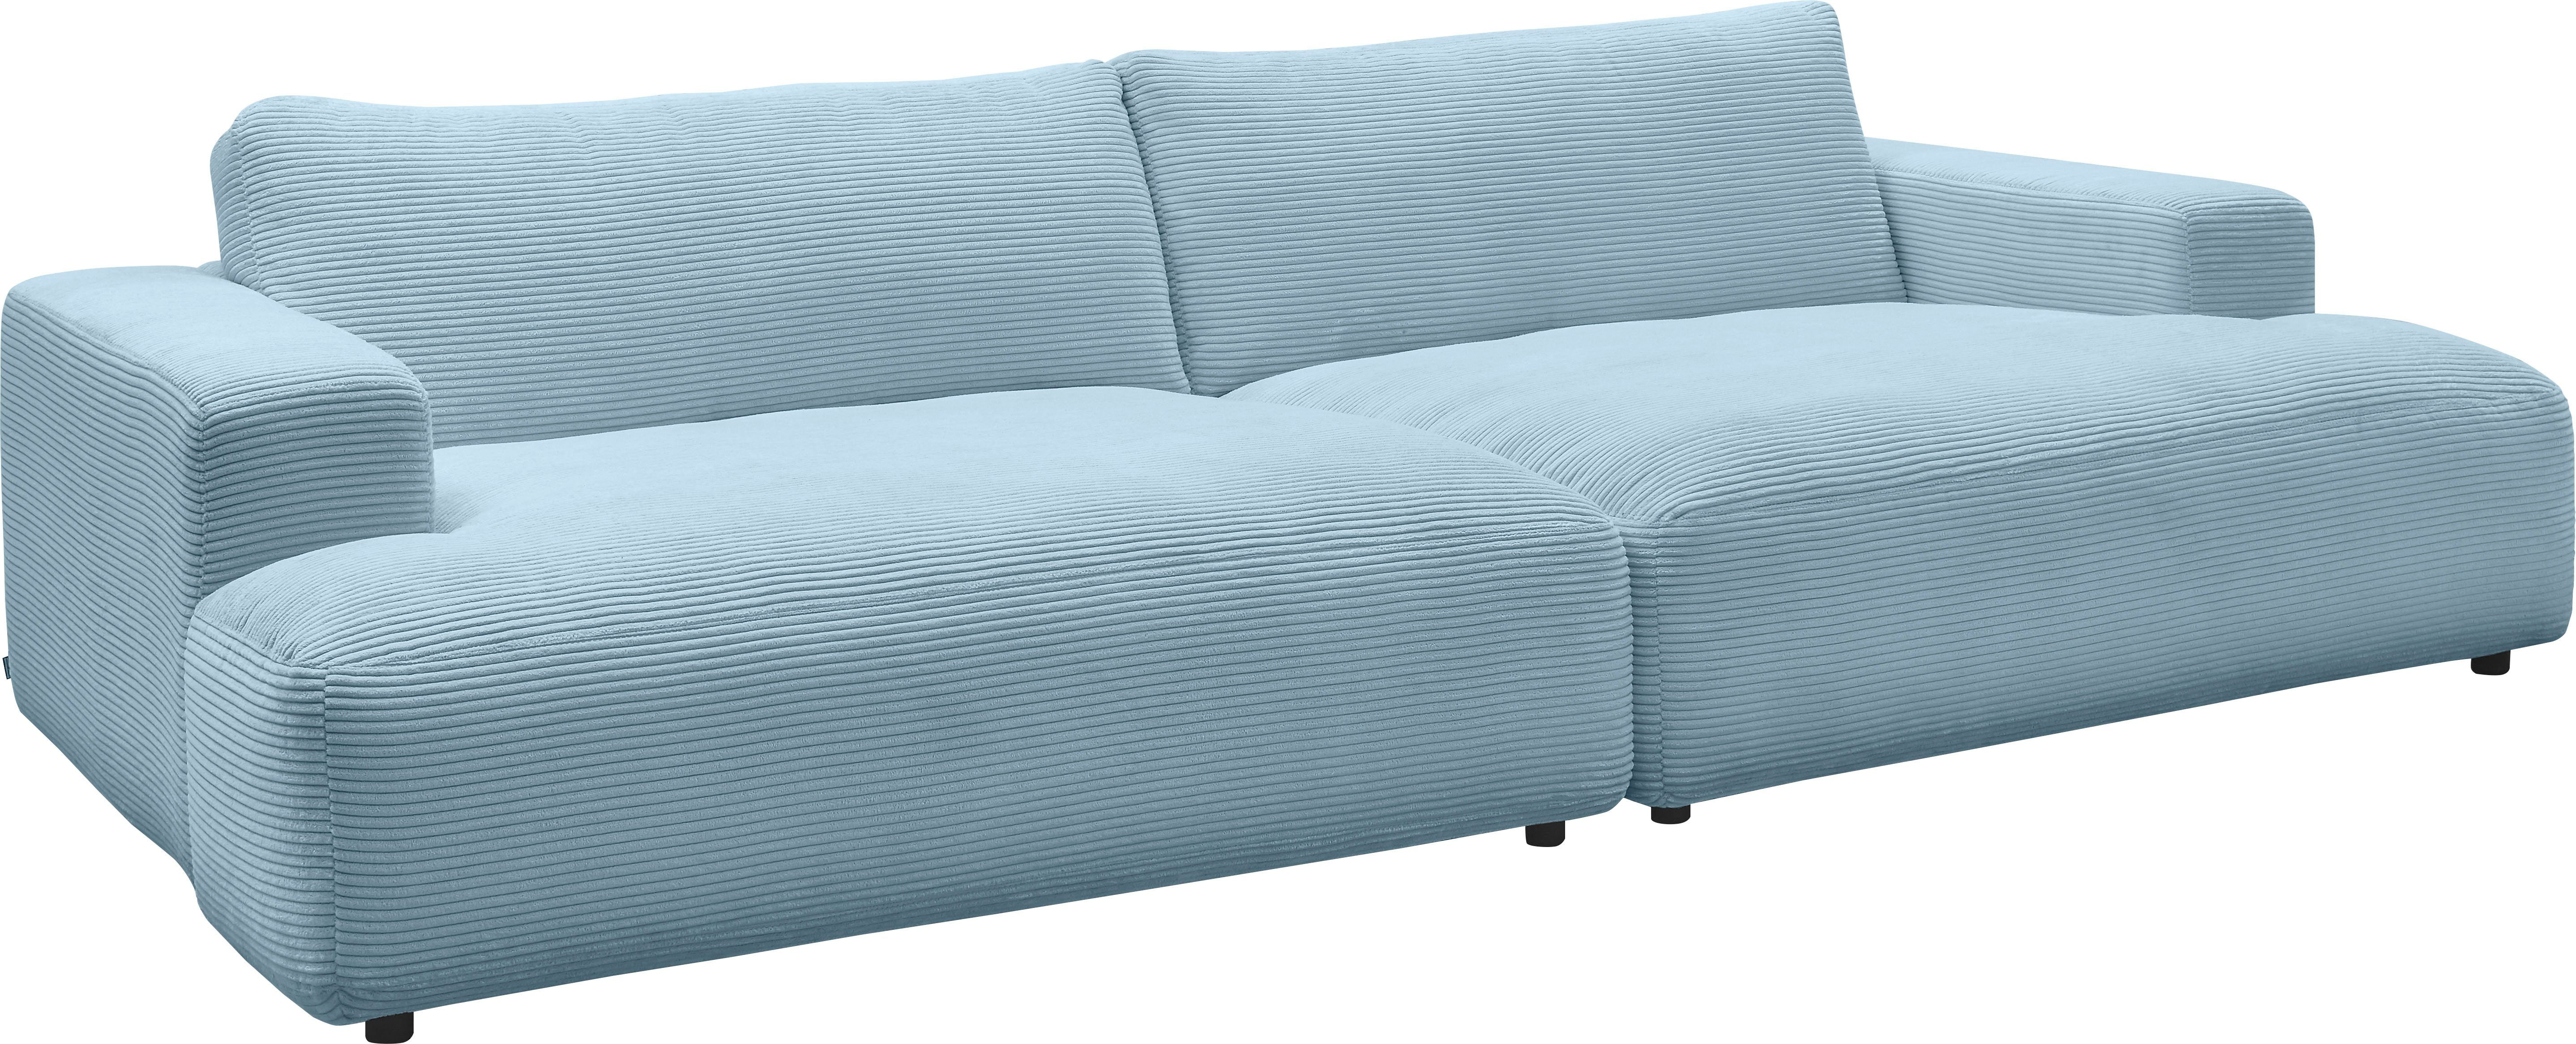 GALLERY M branded Breite Loungesofa by Cord-Bezug, 292 light-blue Musterring cm Lucia